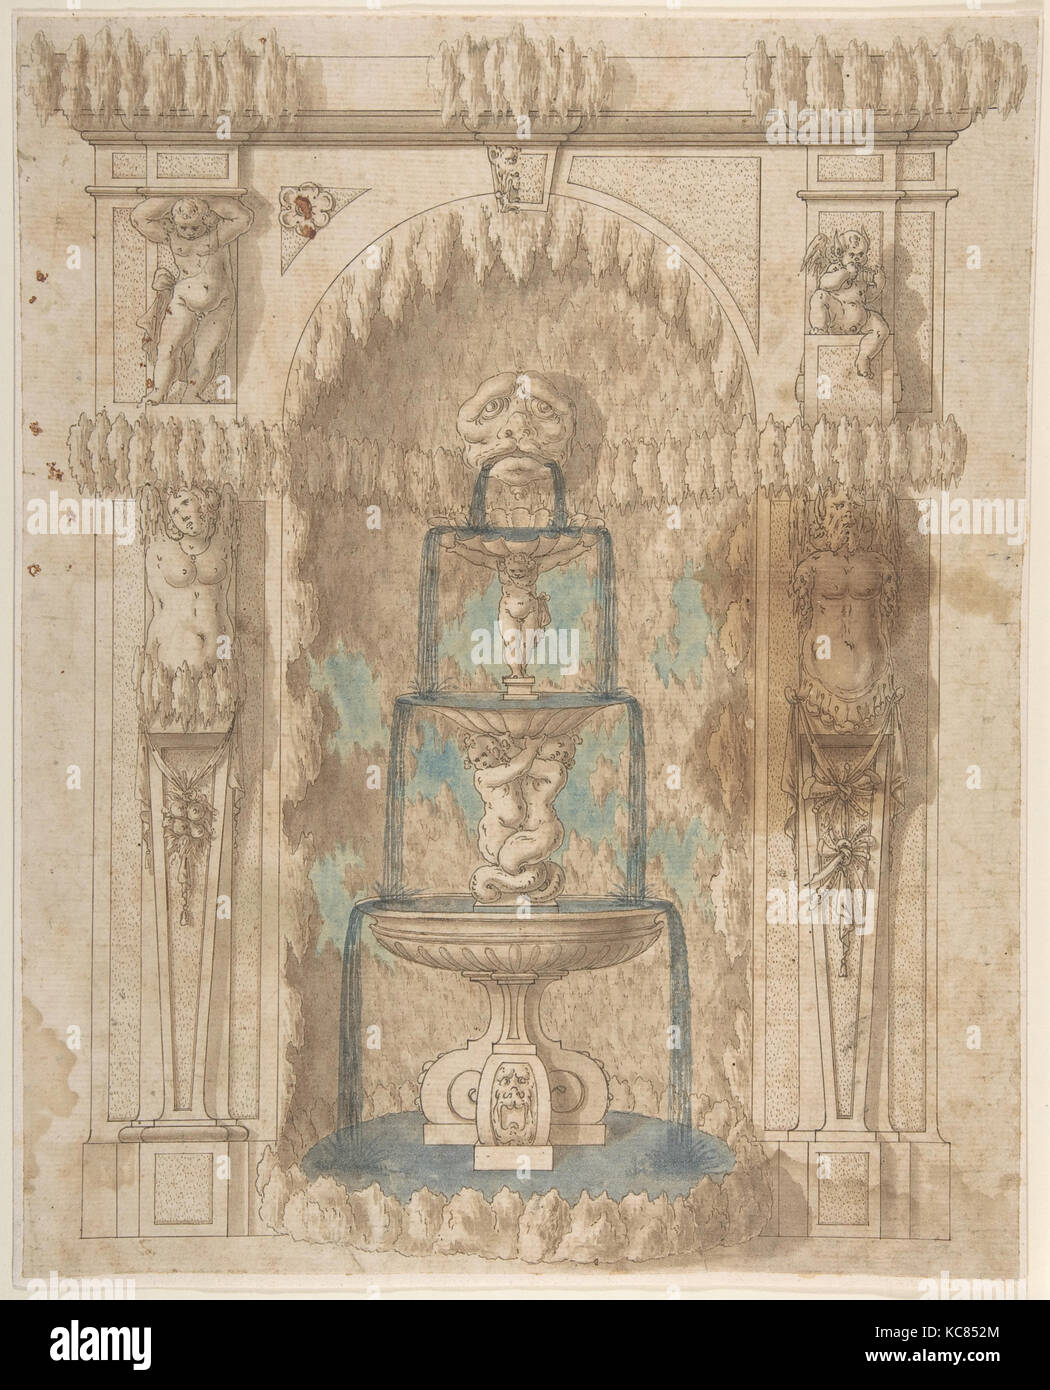 Design for a Grotto with a Fountain, Anonymous, Italian, 17th century Stock Photo